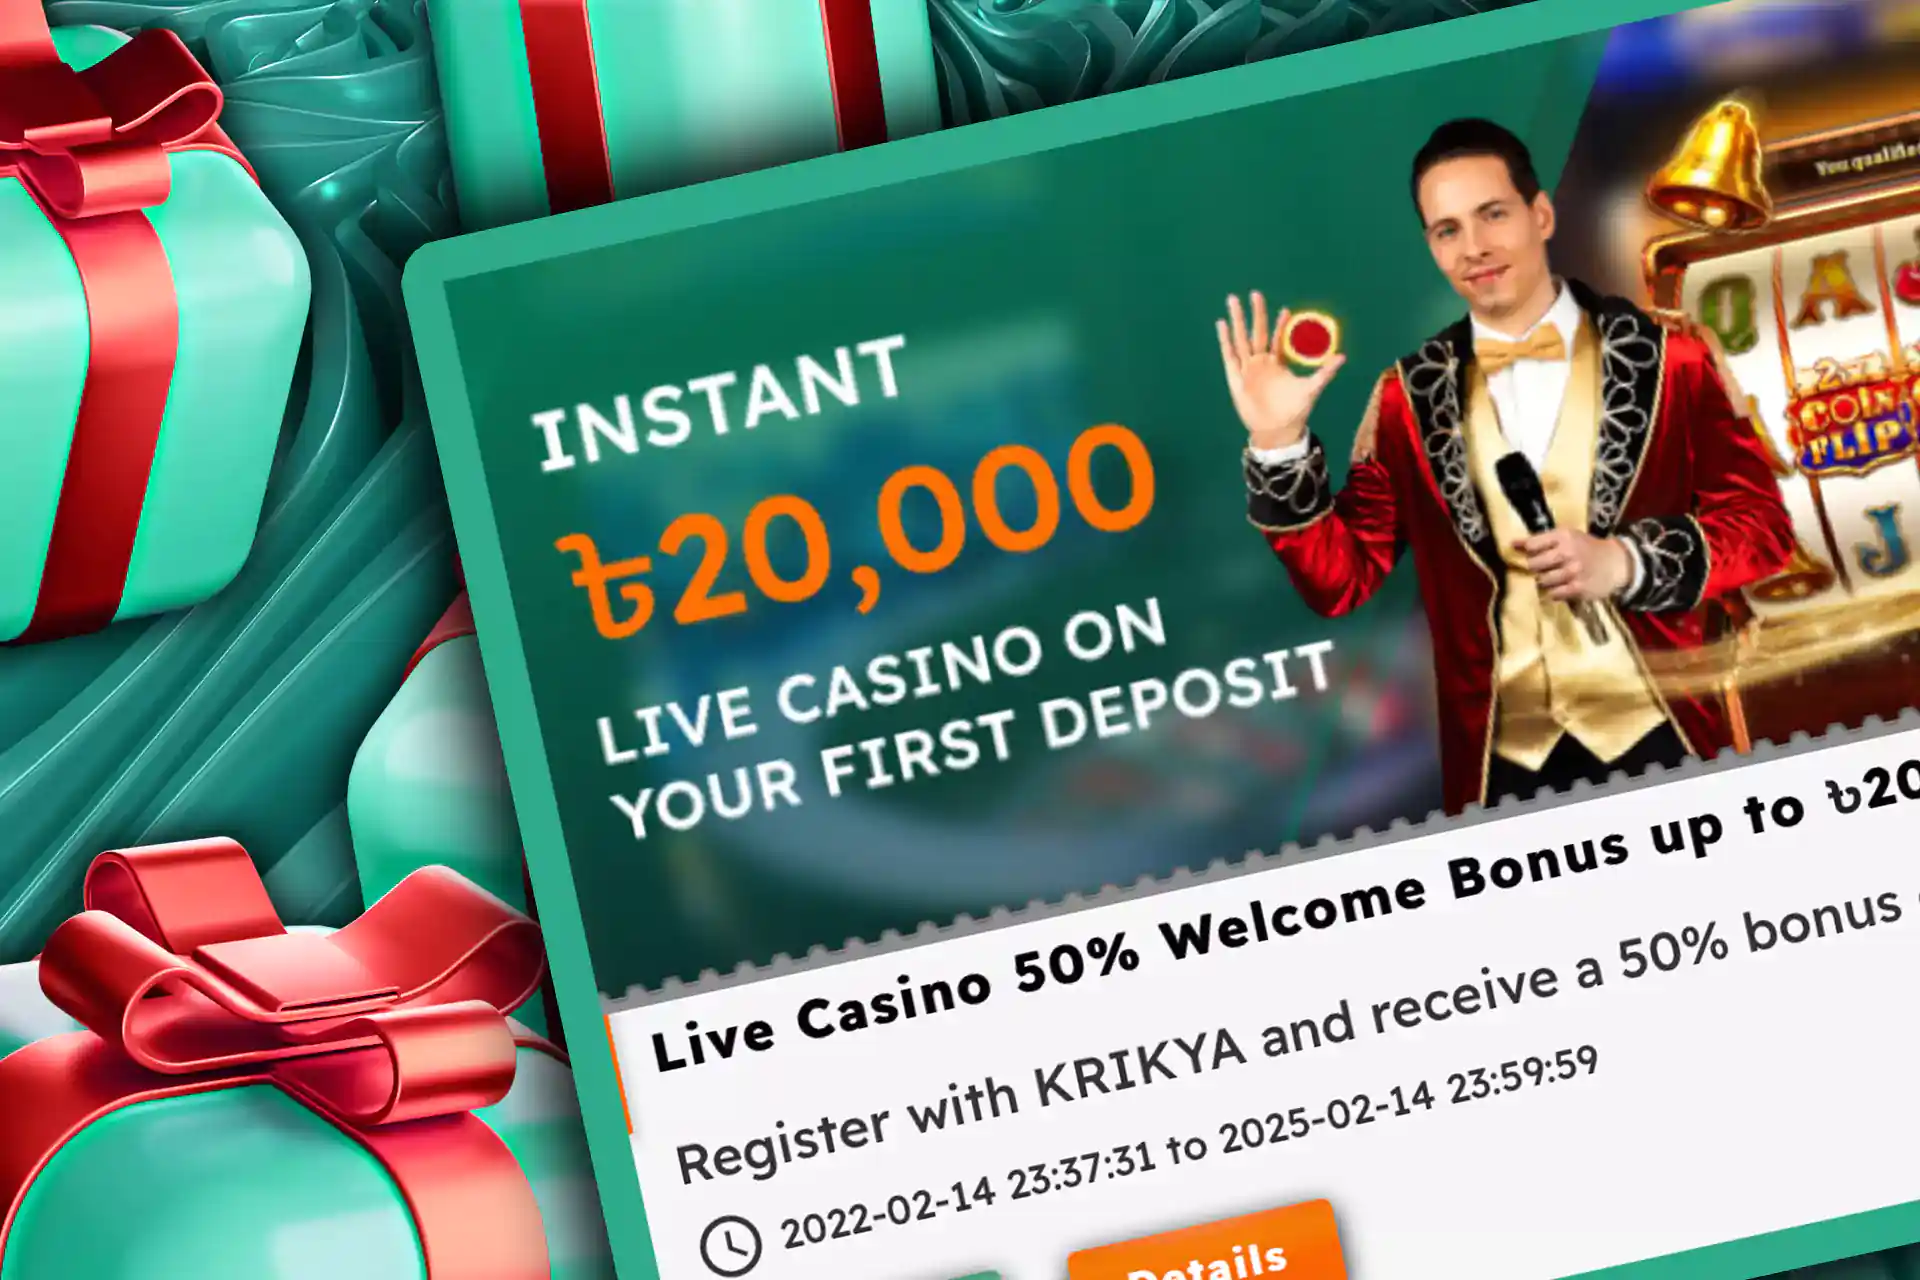 Claim your welcome bonus after first deposit.